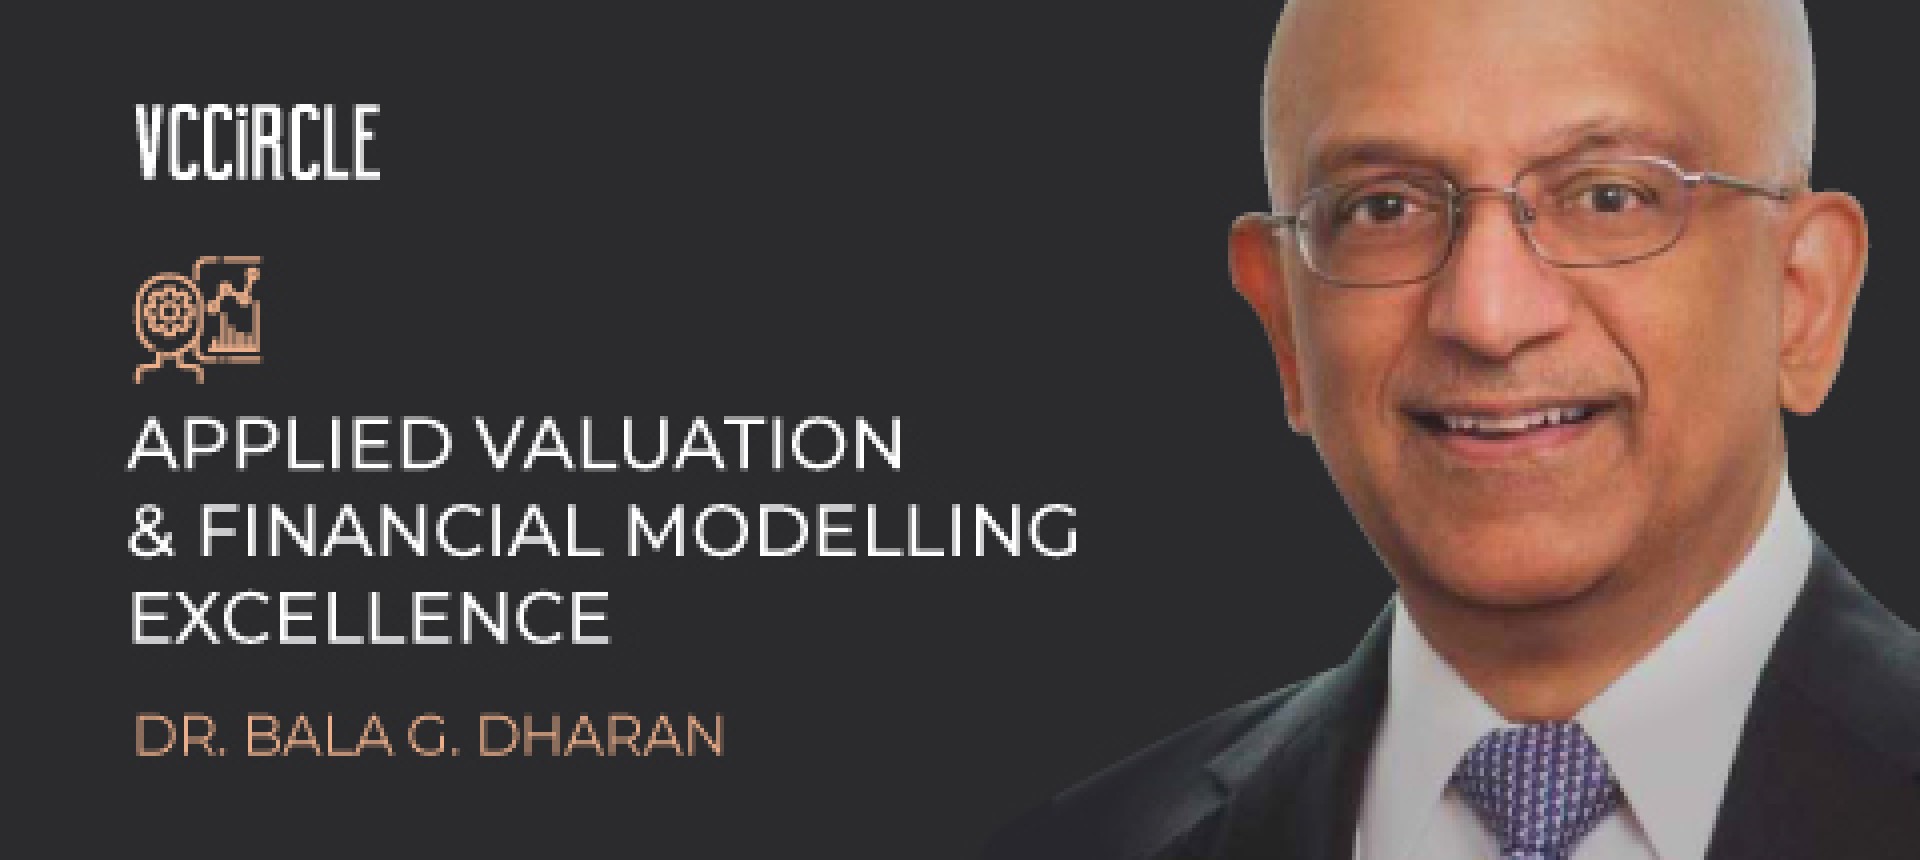 Applied Valuation & Financial Modelling Excellence by Dr. Bala G. Dharan